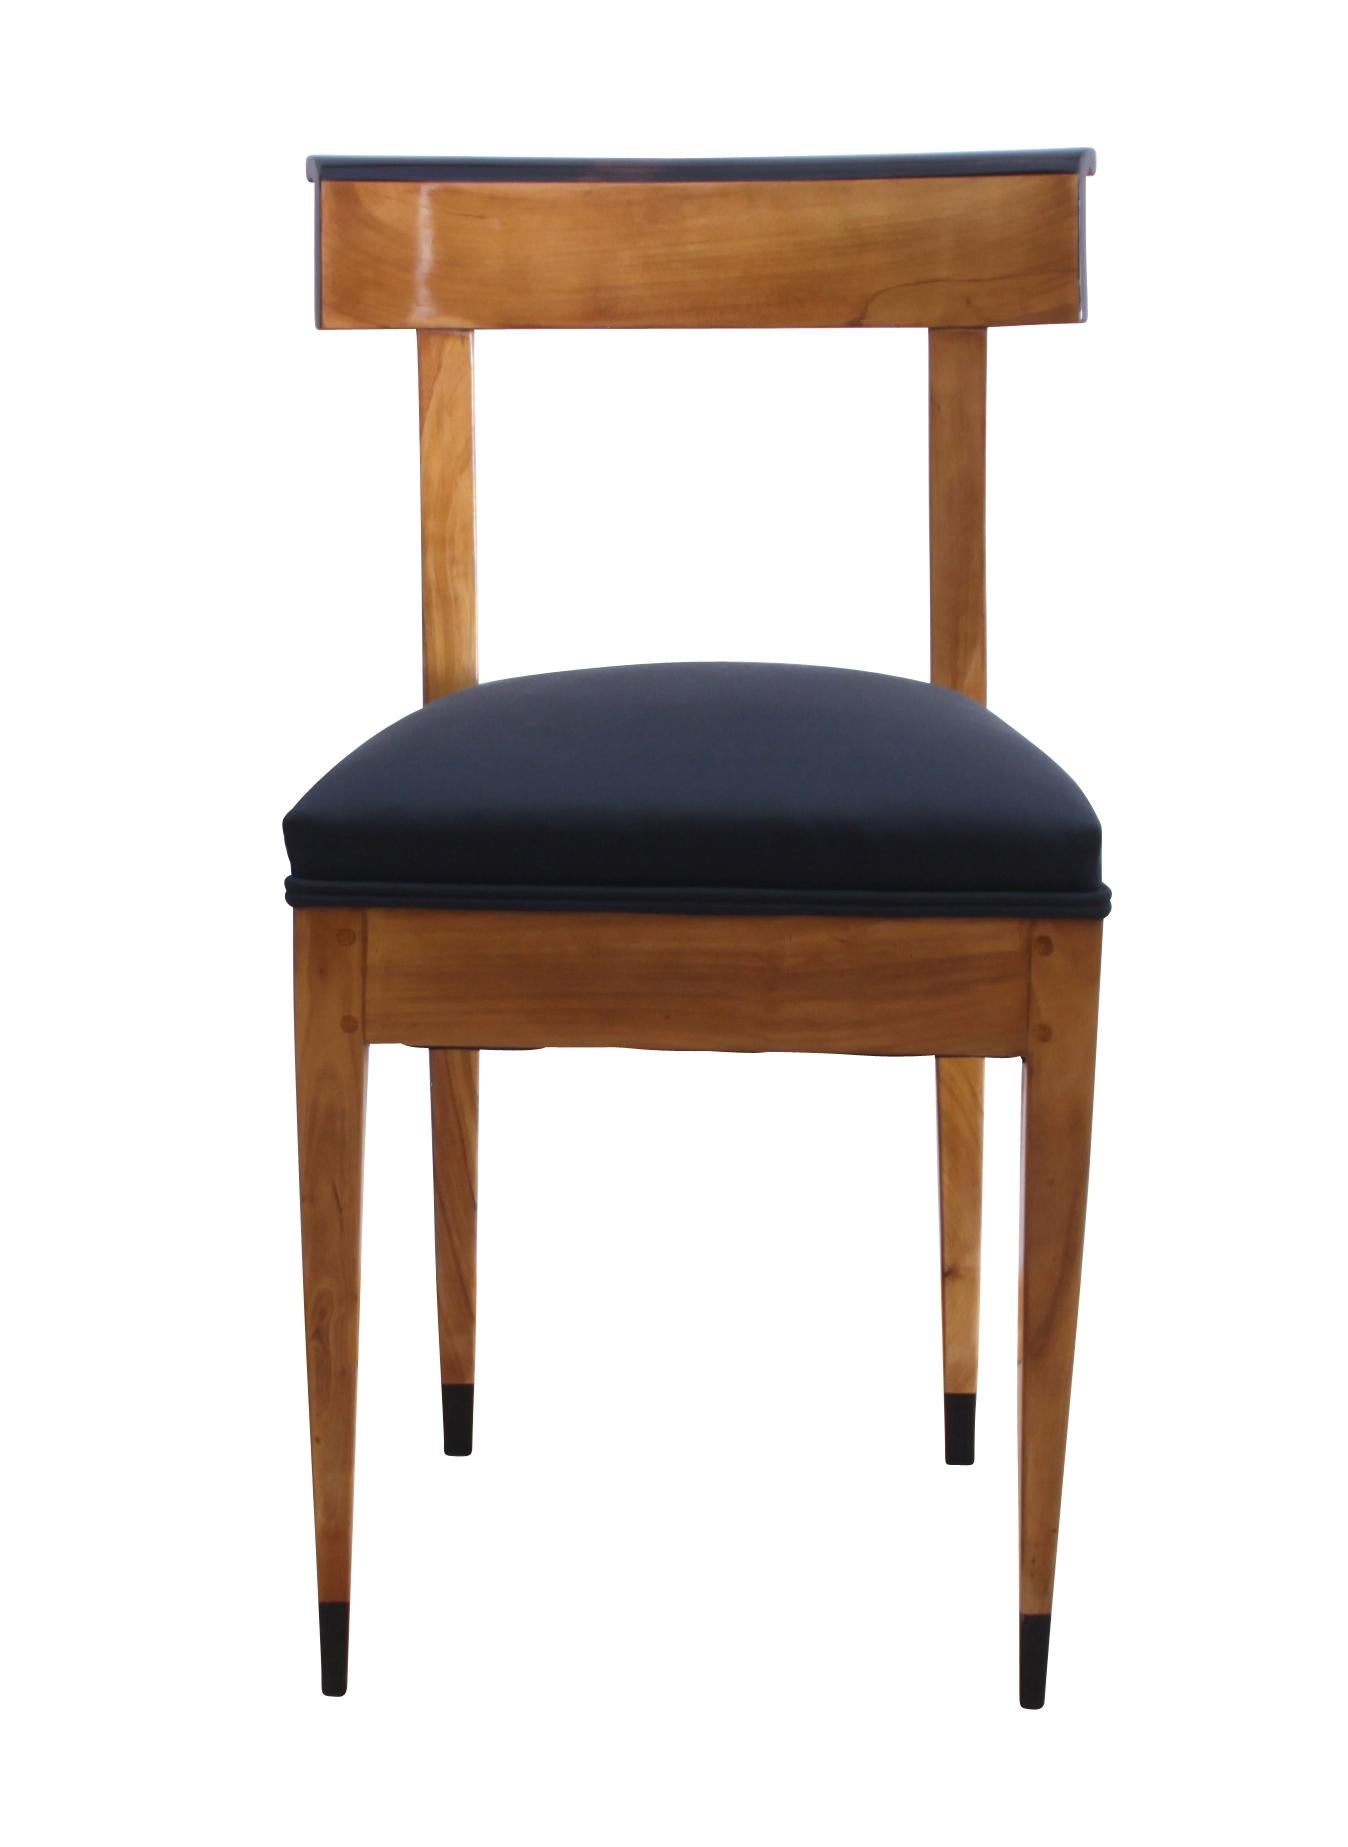 Very typical, Classic and plain Biedermeier from West Germany (Rheinland), circa 1820.
Bright cherry solid wood with ebonized parts. The curved backrest gives a very comfortable seat.

For the upholstery fabric a Classic black fabric with black